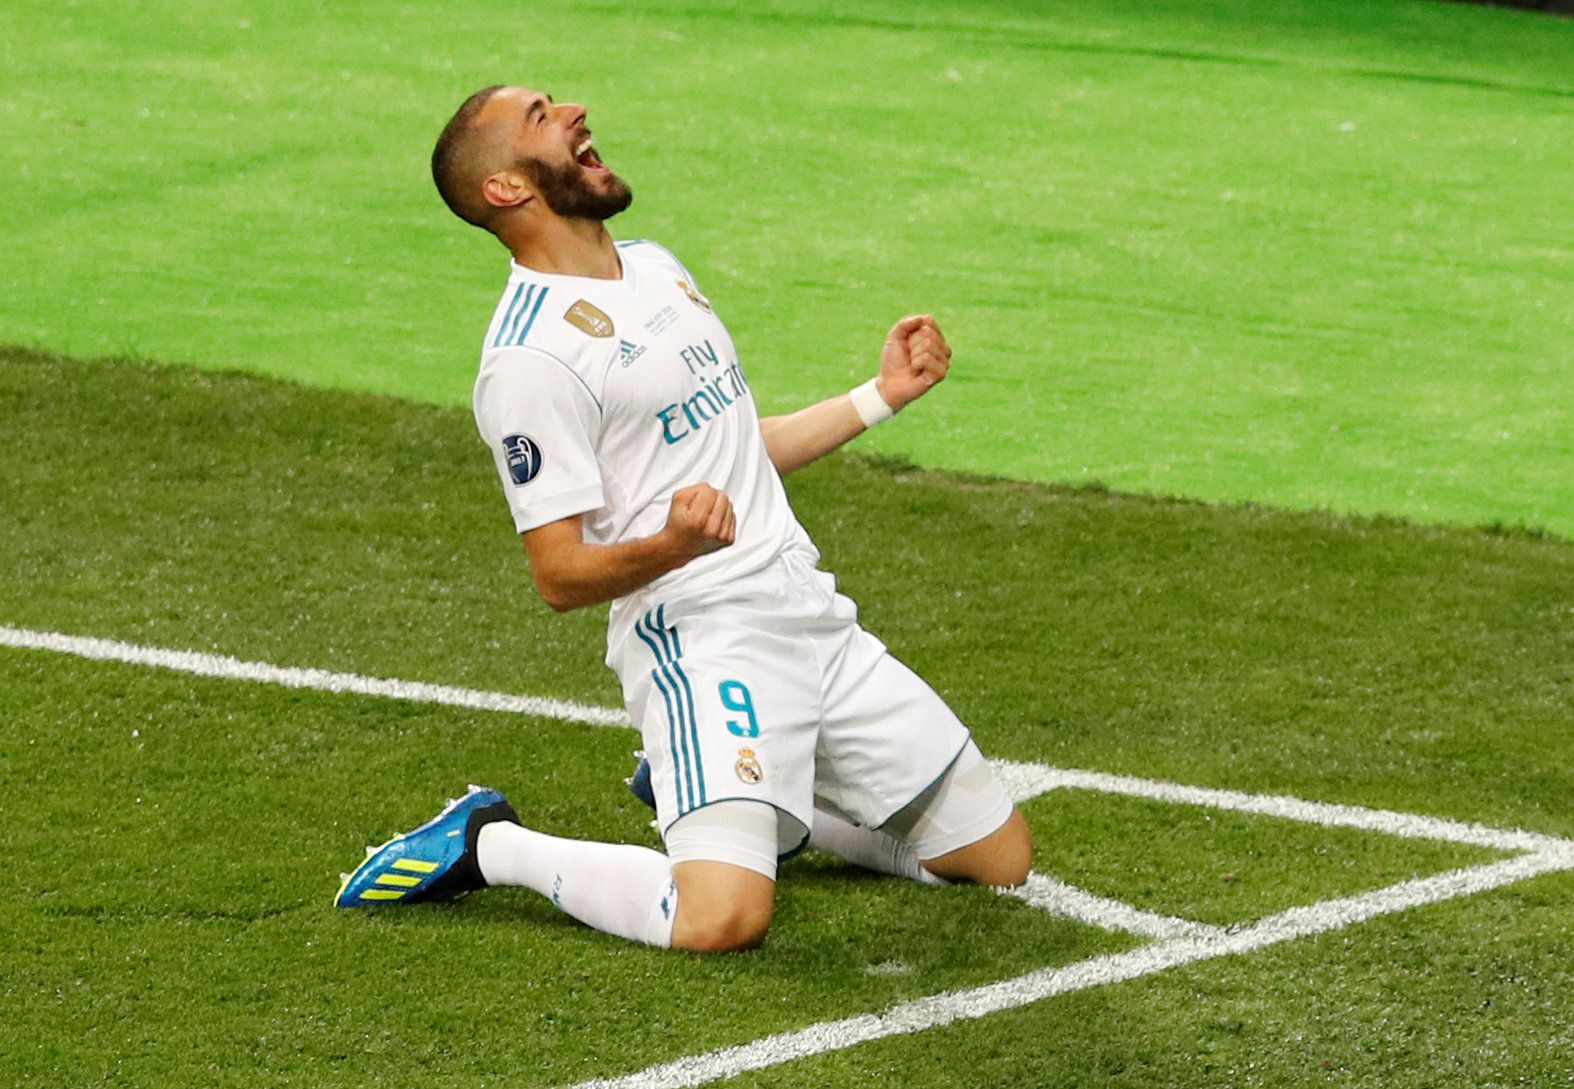 Soccer Football - Champions League Final - Real Madrid v Liverpool - NSC Olympic Stadium, Kiev, Ukraine - May 26, 2018   Real Madrid's Karim Benzema celebrates scoring their first goal    REUTERS/Phil Noble